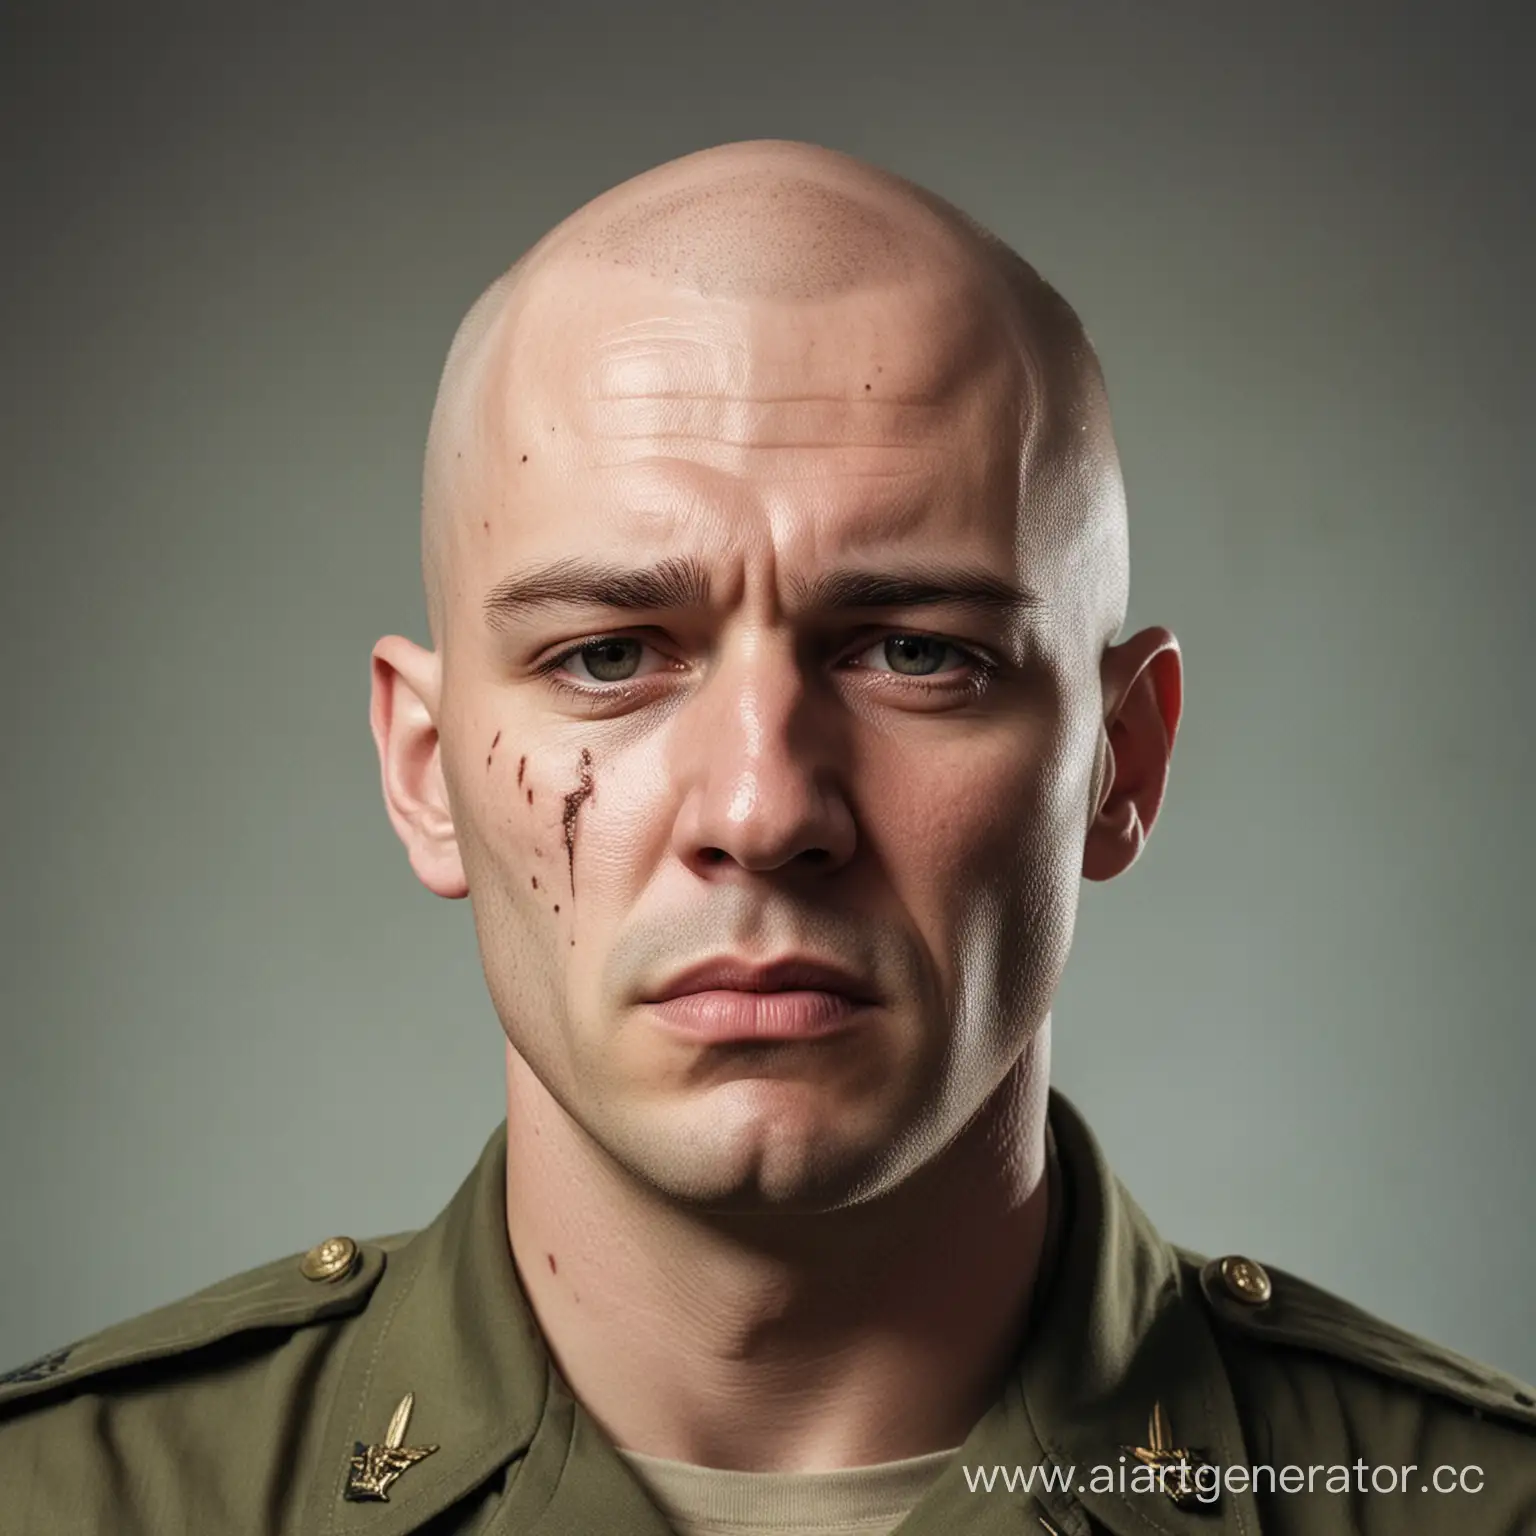 A man with a scar on his face, in military uniform, bald, sad look